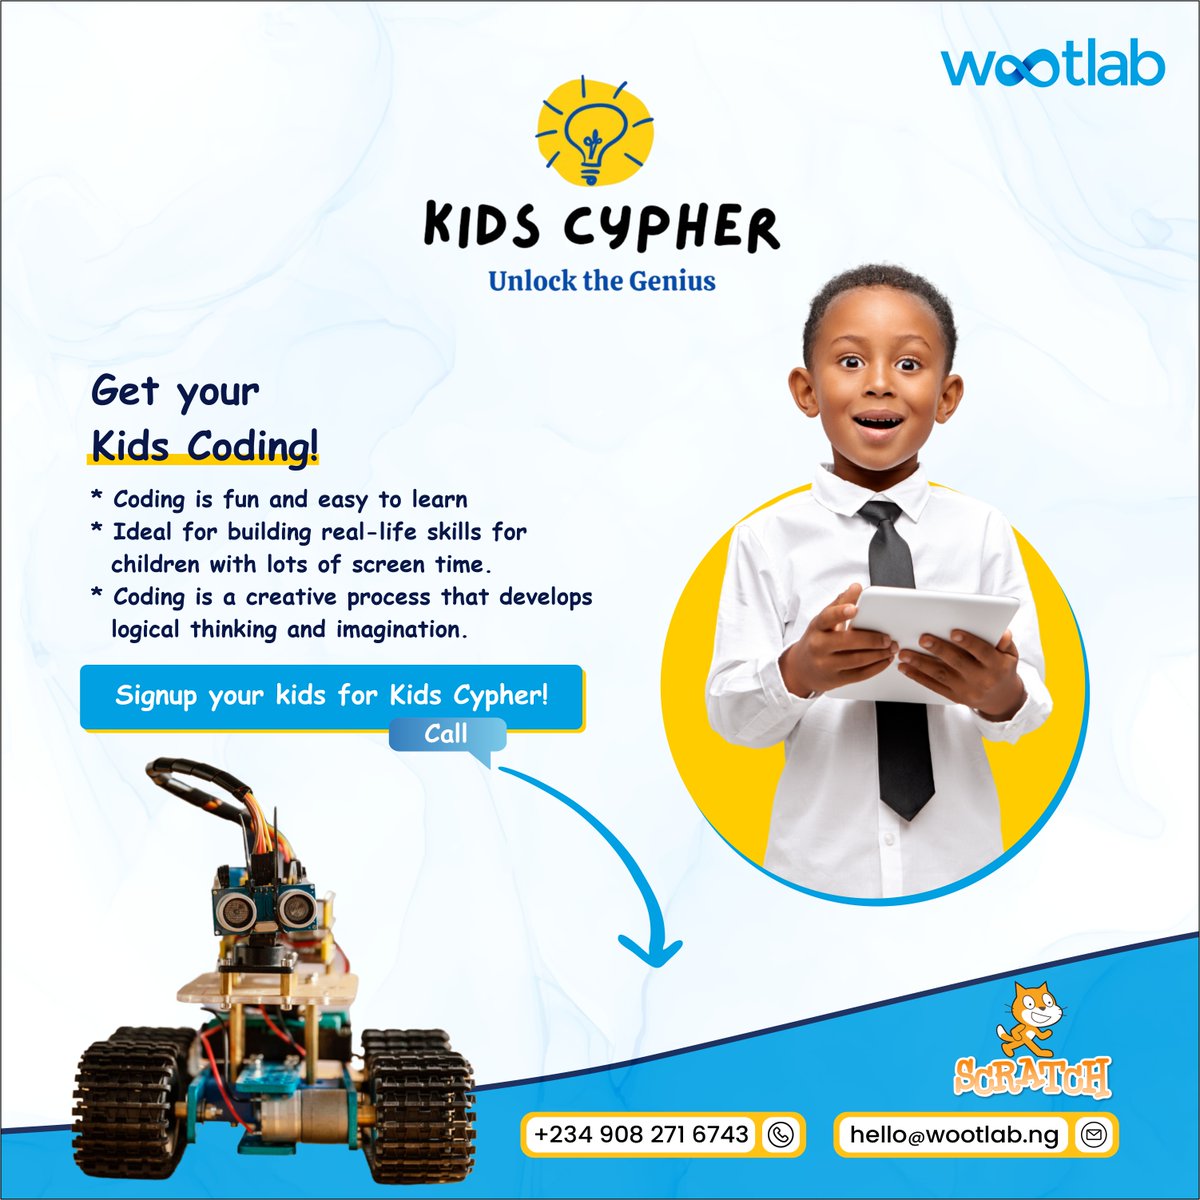 5/ Kindly contact us to get started.

#coding #techkids #abujaschools #games #digitalkids #wootlab #kidscypher